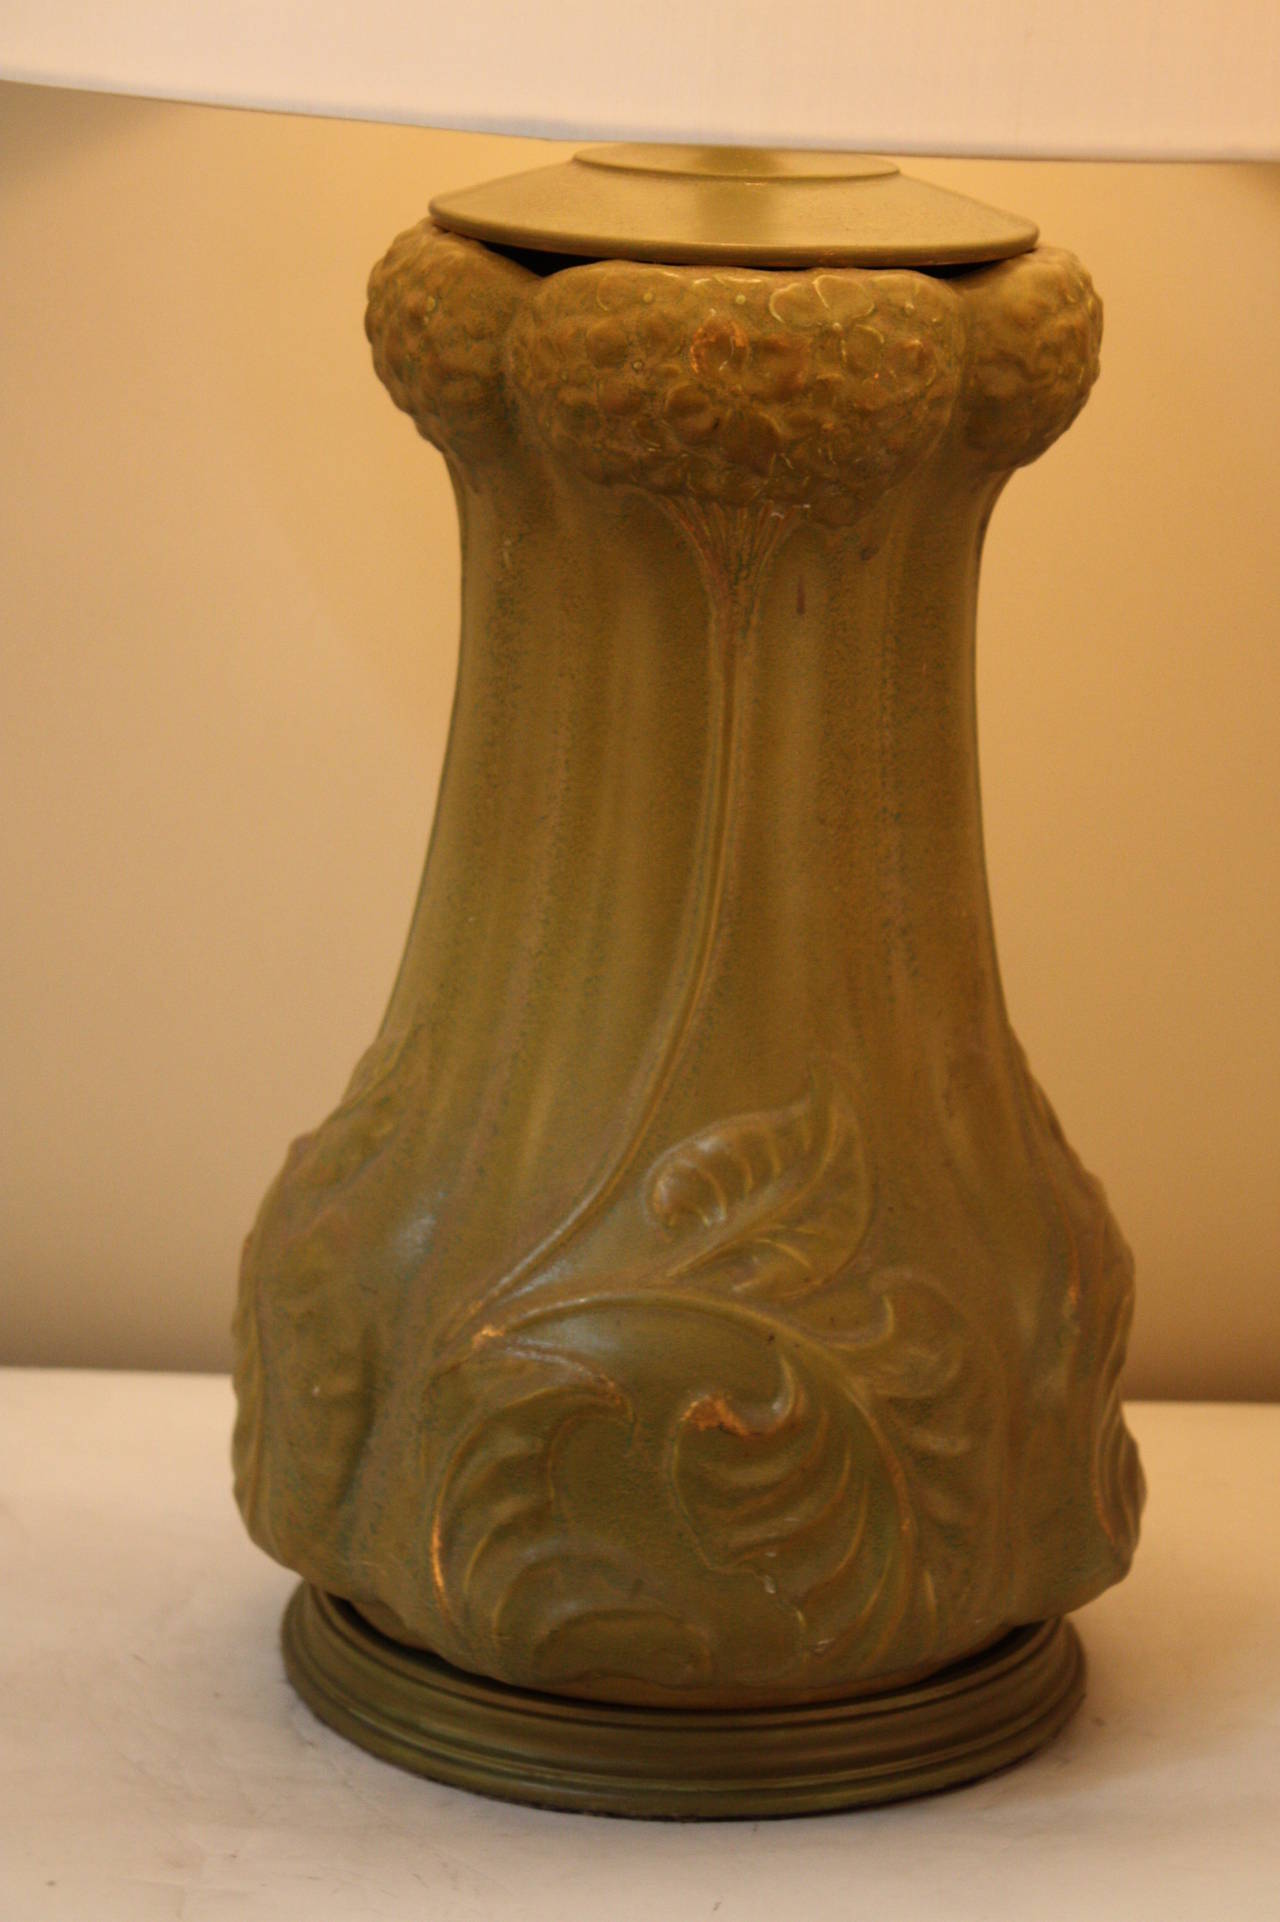 A fabulous ceramic custom-made French table lamp, dating to the Art Nouveau period. 